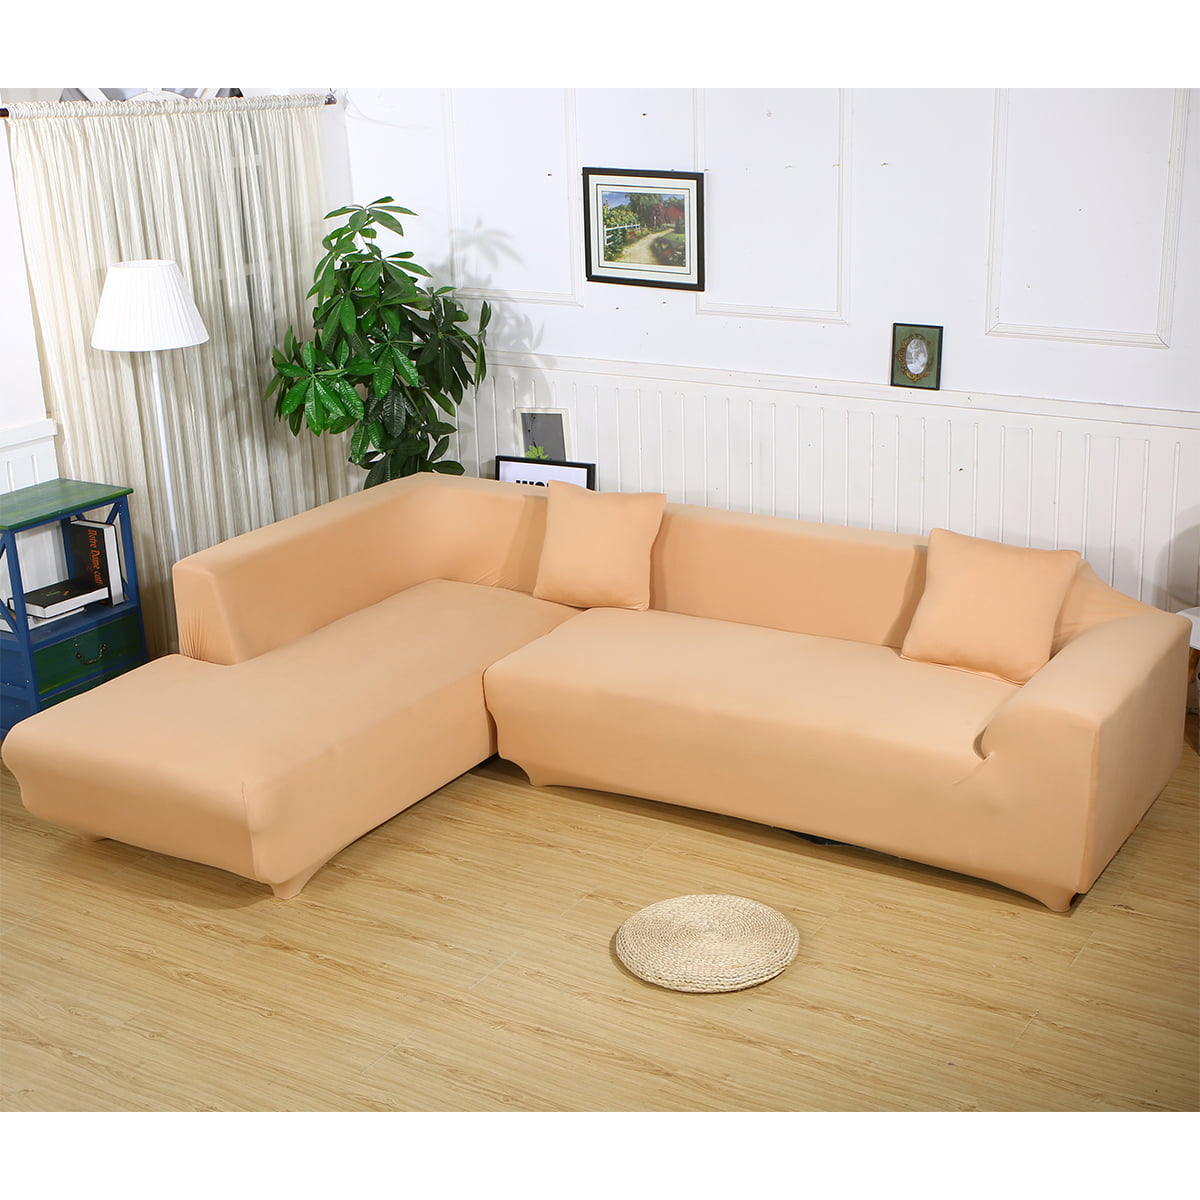 4 Seater L Shape Sofa Slipcover Stretch Protector Soft Couch Soft And Durable, NonSlip And Anti